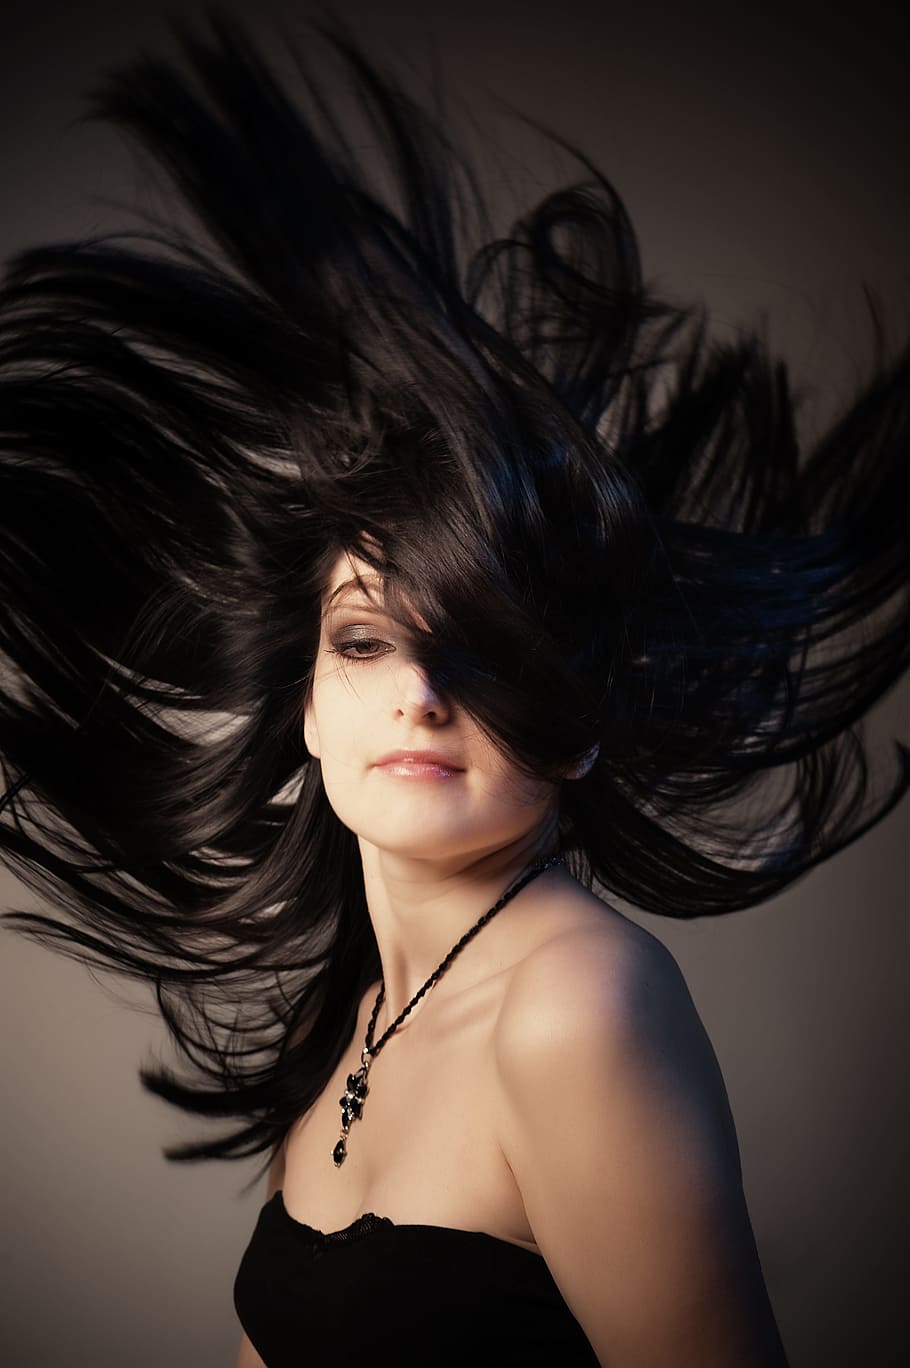 woman, flipping, hair photography, fashion, lovely, girl, charm, portrait, model, grown up